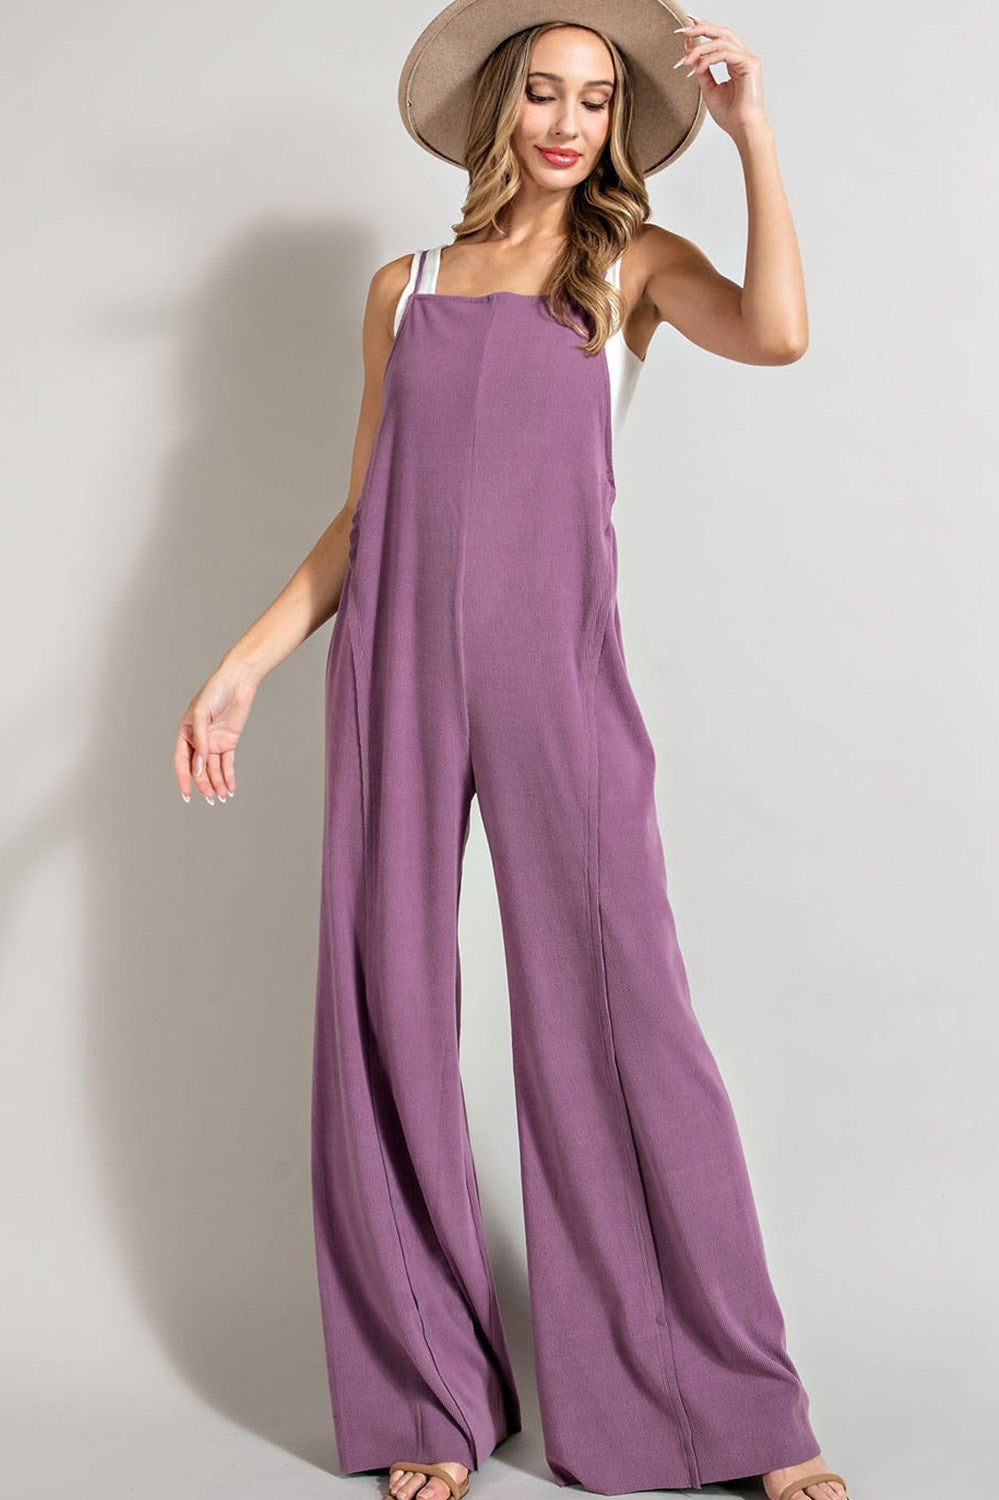 EE:SOME OPEN BACK KNIT OVERALL PURPLE